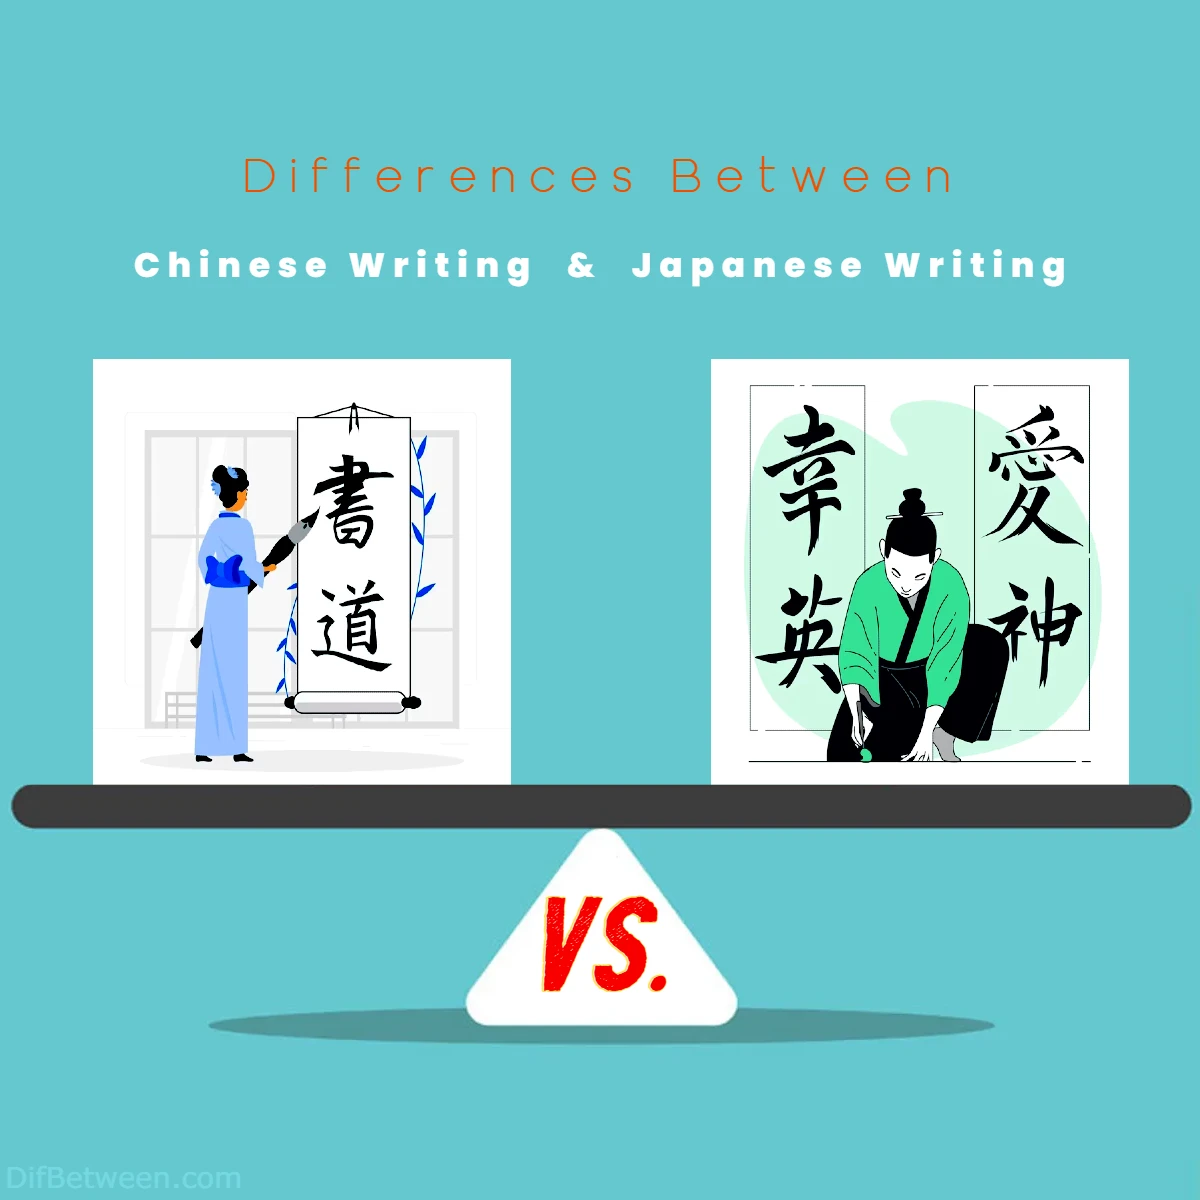 Differences Between Chinese vs Japanese Writing